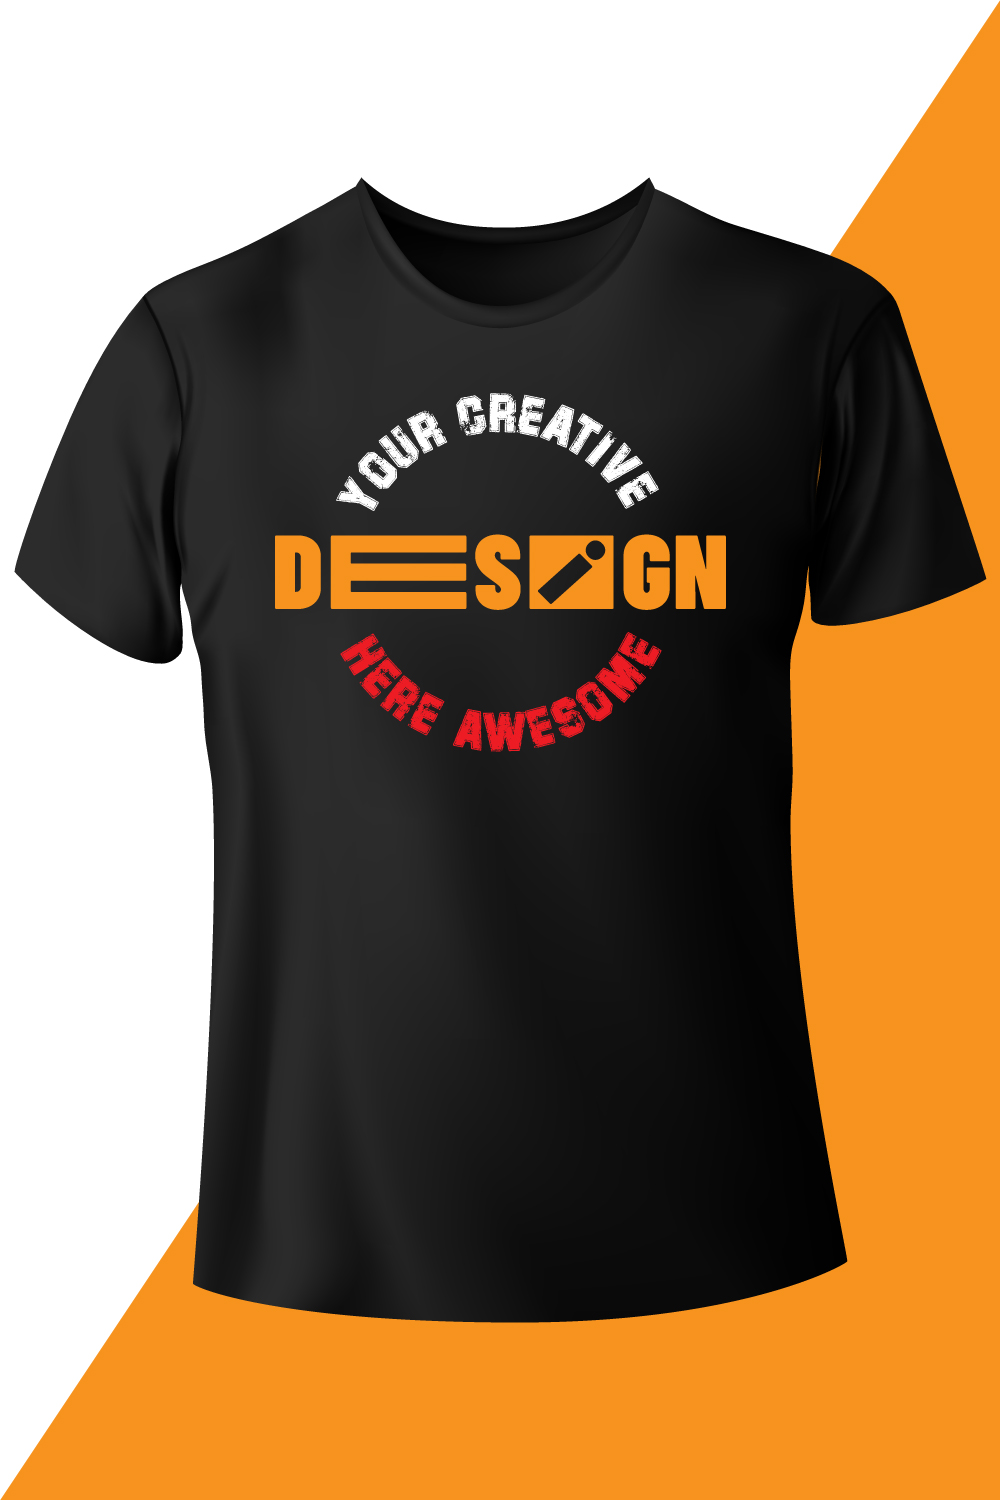 Image of black t-shirt with awesome print Your creative design here awesome.